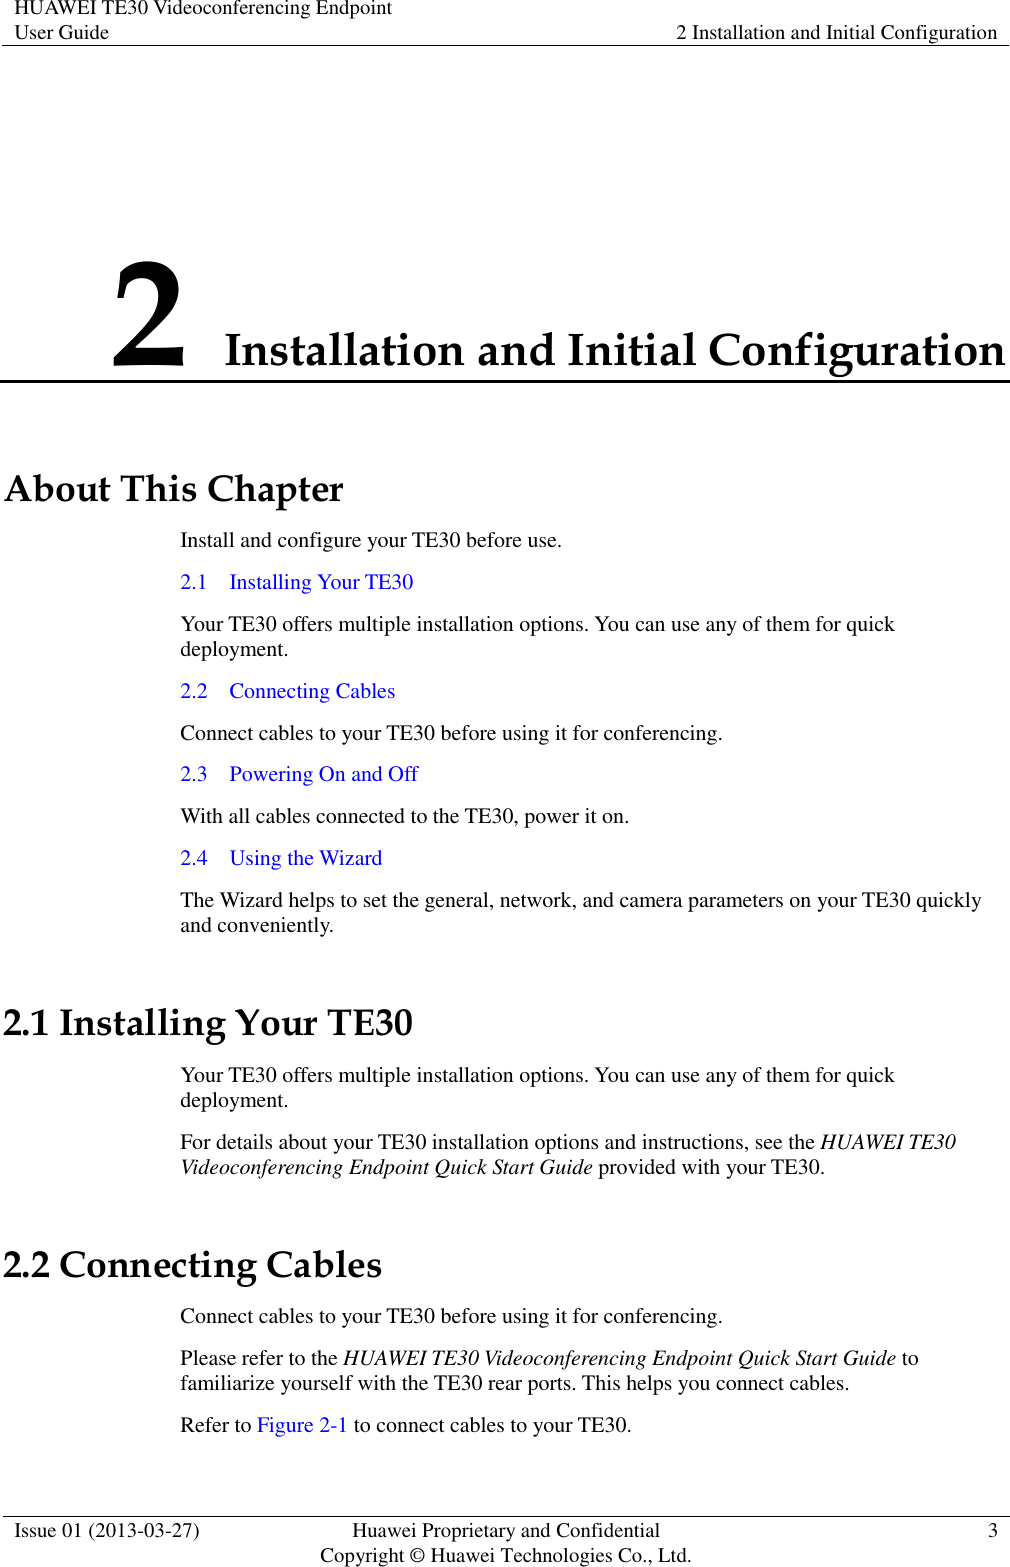 HUAWEI TE30 Videoconferencing Endpoint User Guide 2 Installation and Initial Configuration  Issue 01 (2013-03-27) Huawei Proprietary and Confidential                                     Copyright © Huawei Technologies Co., Ltd. 3  2 Installation and Initial Configuration About This Chapter Install and configure your TE30 before use. 2.1    Installing Your TE30 Your TE30 offers multiple installation options. You can use any of them for quick deployment. 2.2    Connecting Cables Connect cables to your TE30 before using it for conferencing. 2.3    Powering On and Off With all cables connected to the TE30, power it on. 2.4    Using the Wizard The Wizard helps to set the general, network, and camera parameters on your TE30 quickly and conveniently. 2.1 Installing Your TE30 Your TE30 offers multiple installation options. You can use any of them for quick deployment. For details about your TE30 installation options and instructions, see the HUAWEI TE30 Videoconferencing Endpoint Quick Start Guide provided with your TE30. 2.2 Connecting Cables Connect cables to your TE30 before using it for conferencing. Please refer to the HUAWEI TE30 Videoconferencing Endpoint Quick Start Guide to familiarize yourself with the TE30 rear ports. This helps you connect cables. Refer to Figure 2-1 to connect cables to your TE30. 